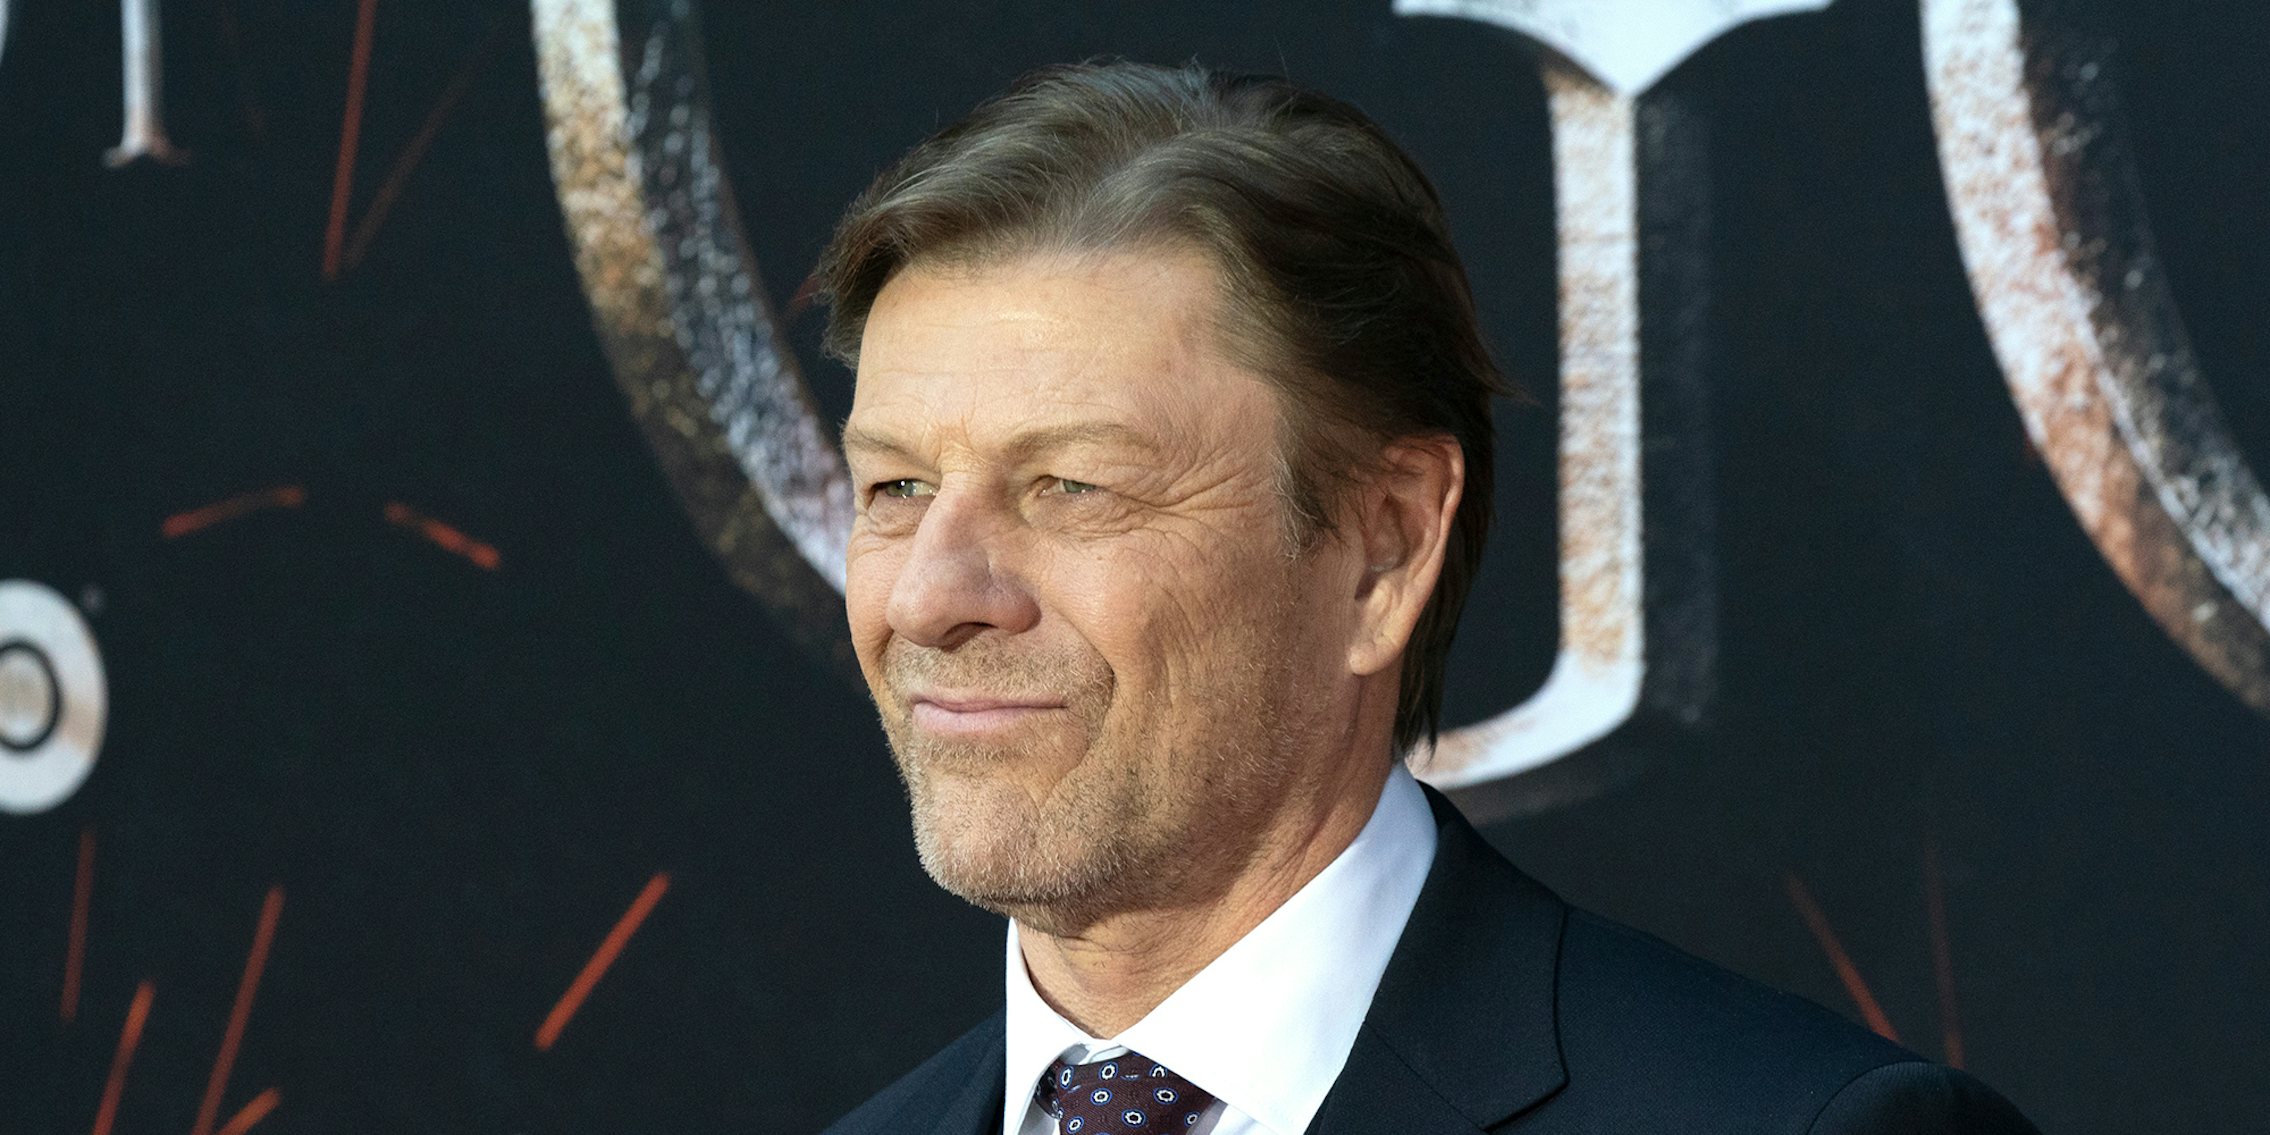 Sean Bean attends HBO Game of Thrones final season premiere at Radio City Music Hall